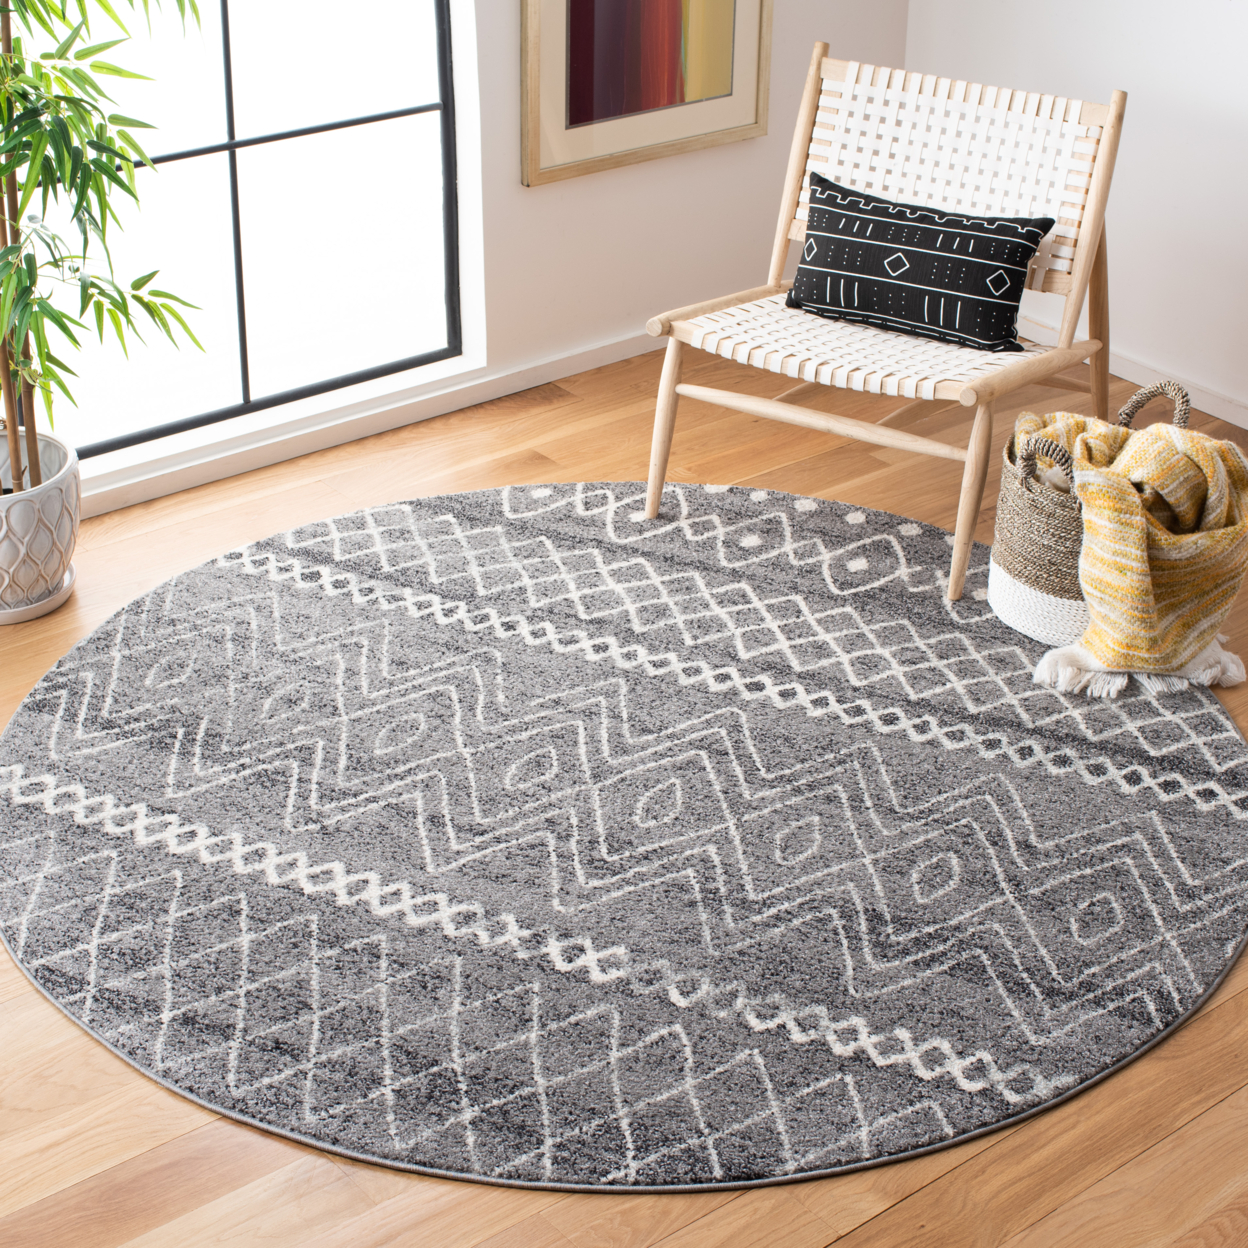 SAFAVIEH Madison Collection MAD798F Charcoal / Ivory Rug - 5-1 X 7-6